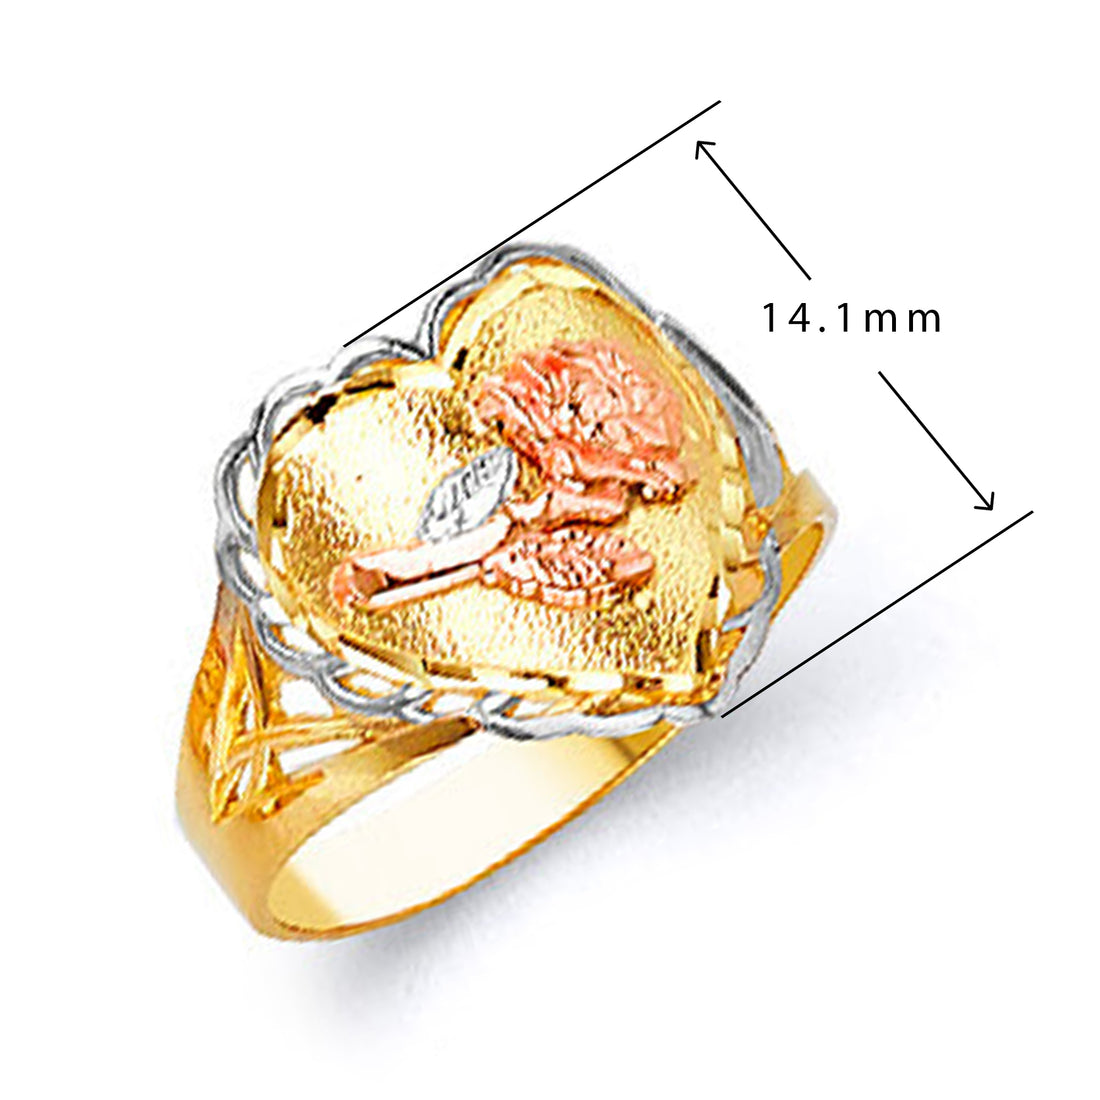 Royal Rose Motif Ring in Solid Gold with Measurement